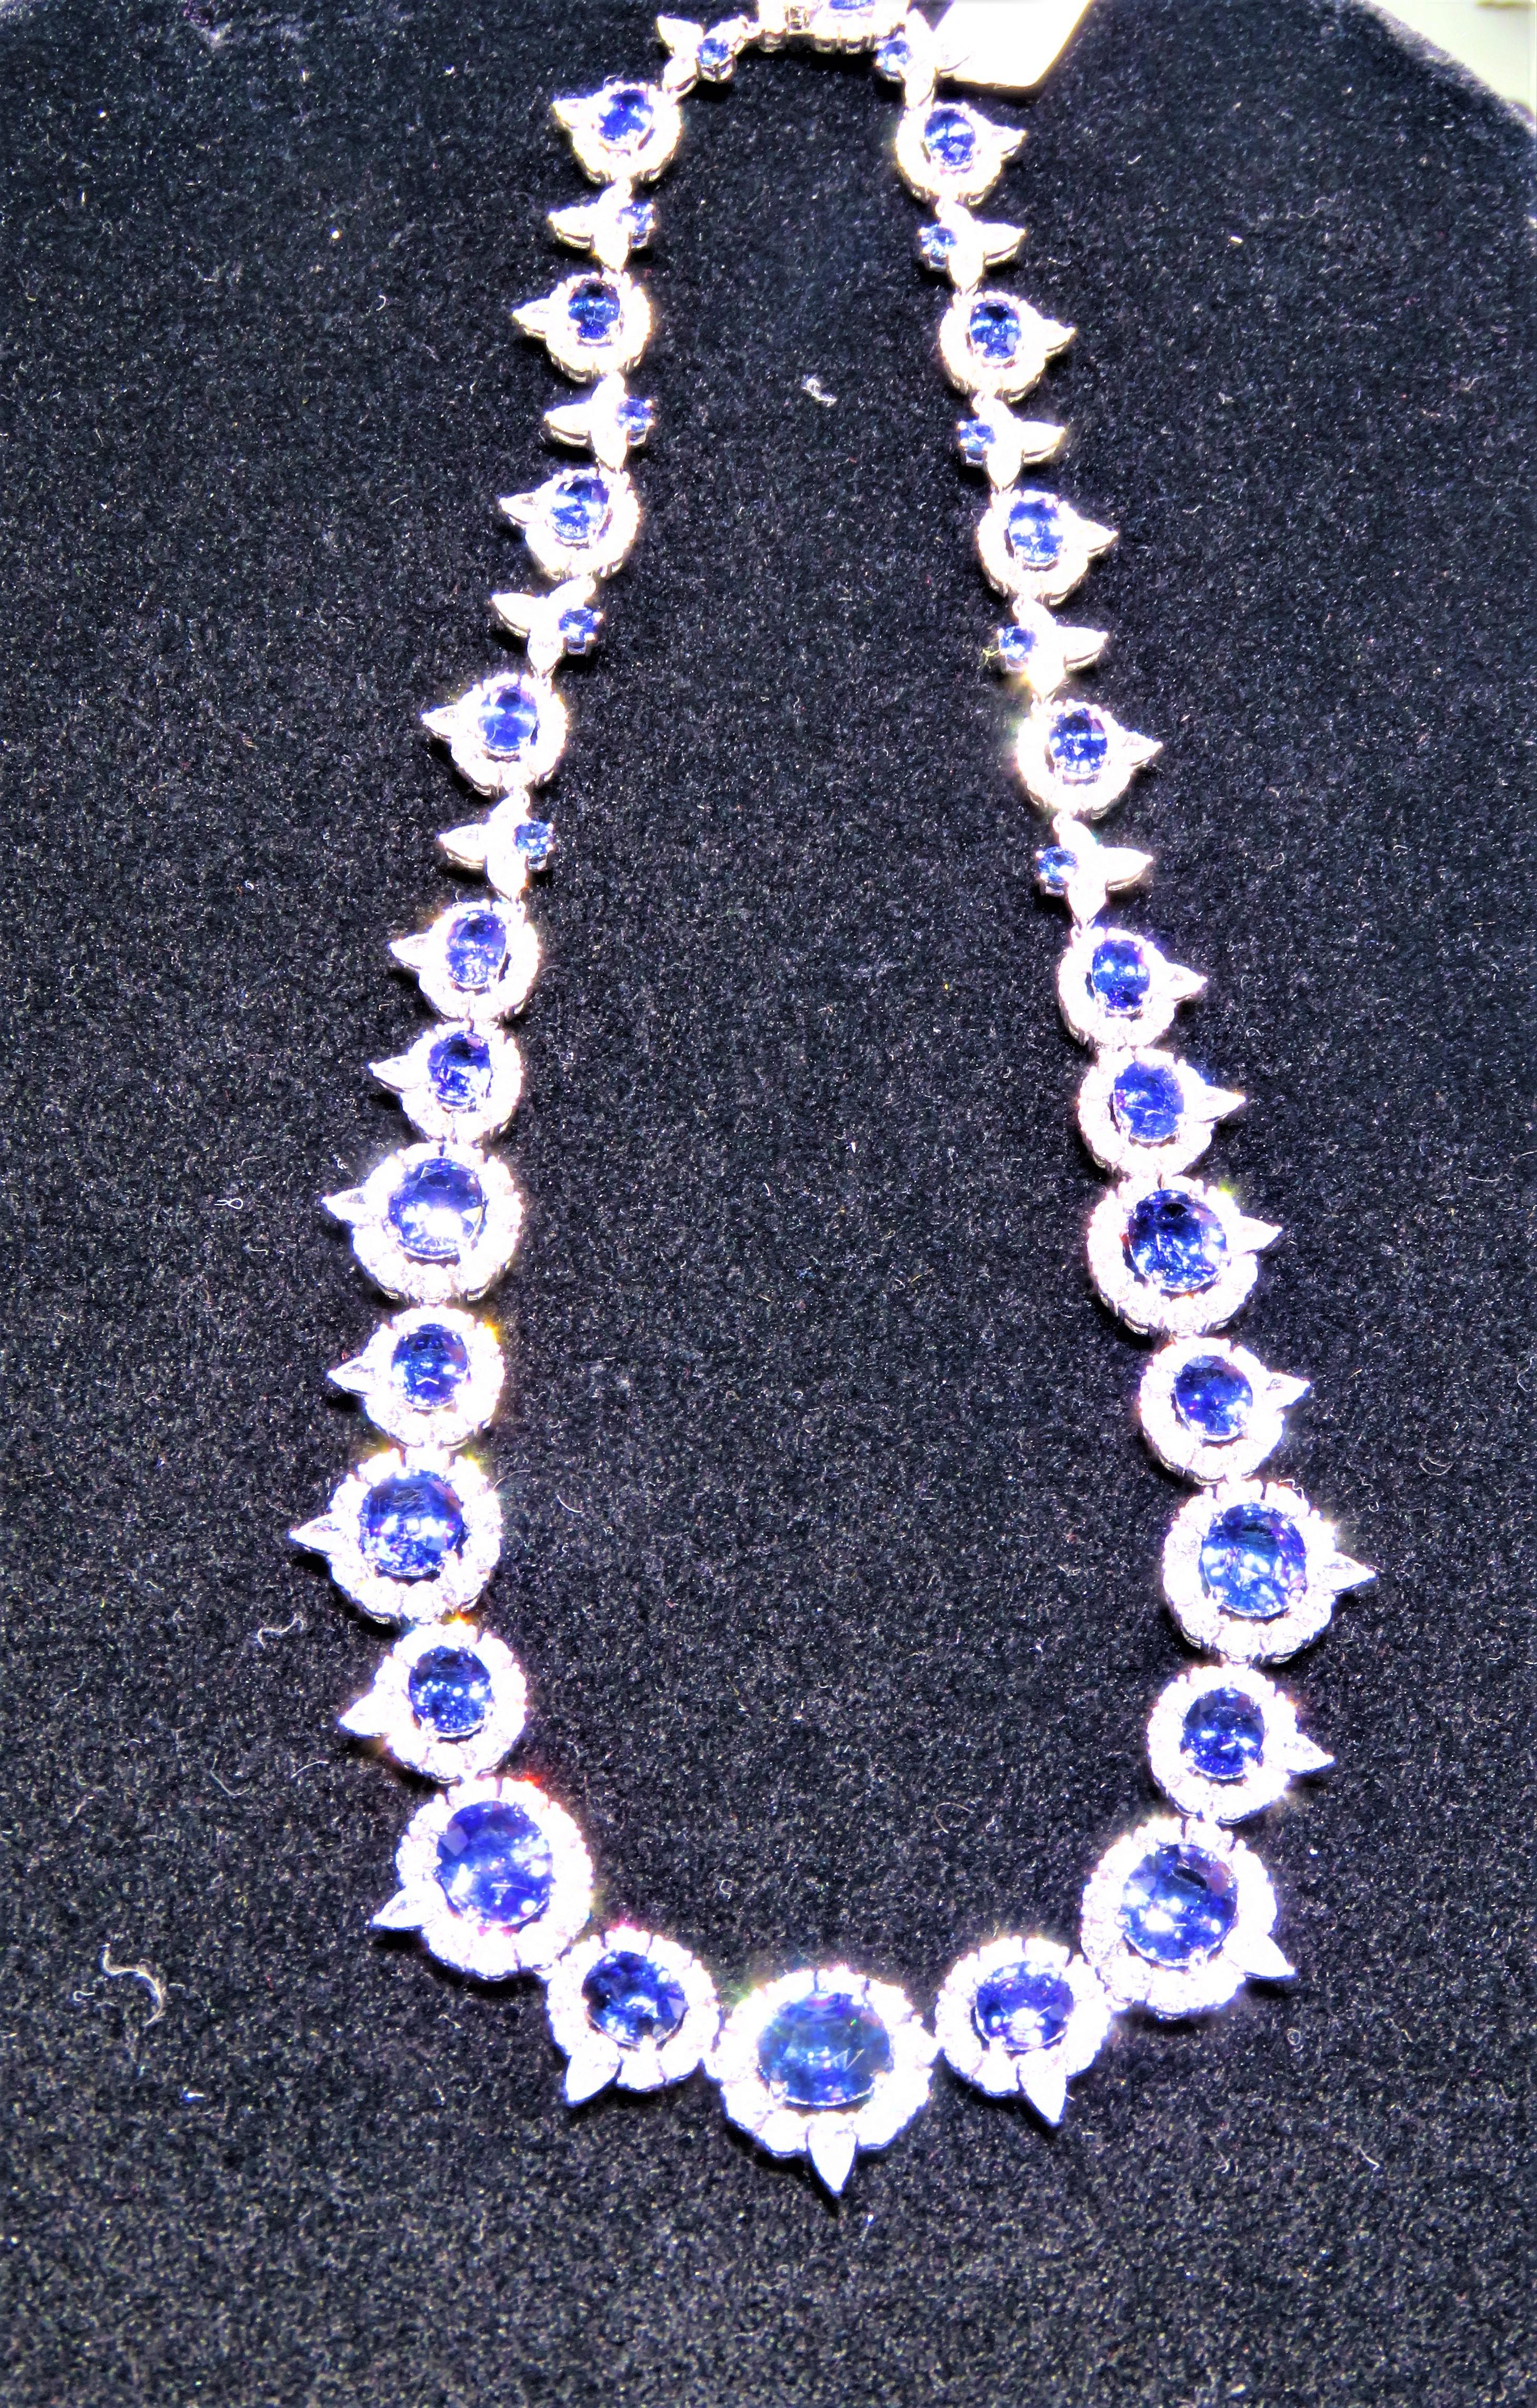 The Following Item we are offering is a Rare Important Estate Radiant Large Rare Fancy GIA Certified 18KT Gold Certified Ceylon Blue Sapphire and Diamond Necklace. Necklace is comprised of Rare Gorgeous Large Blue Sapphires each surrounded by a Halo